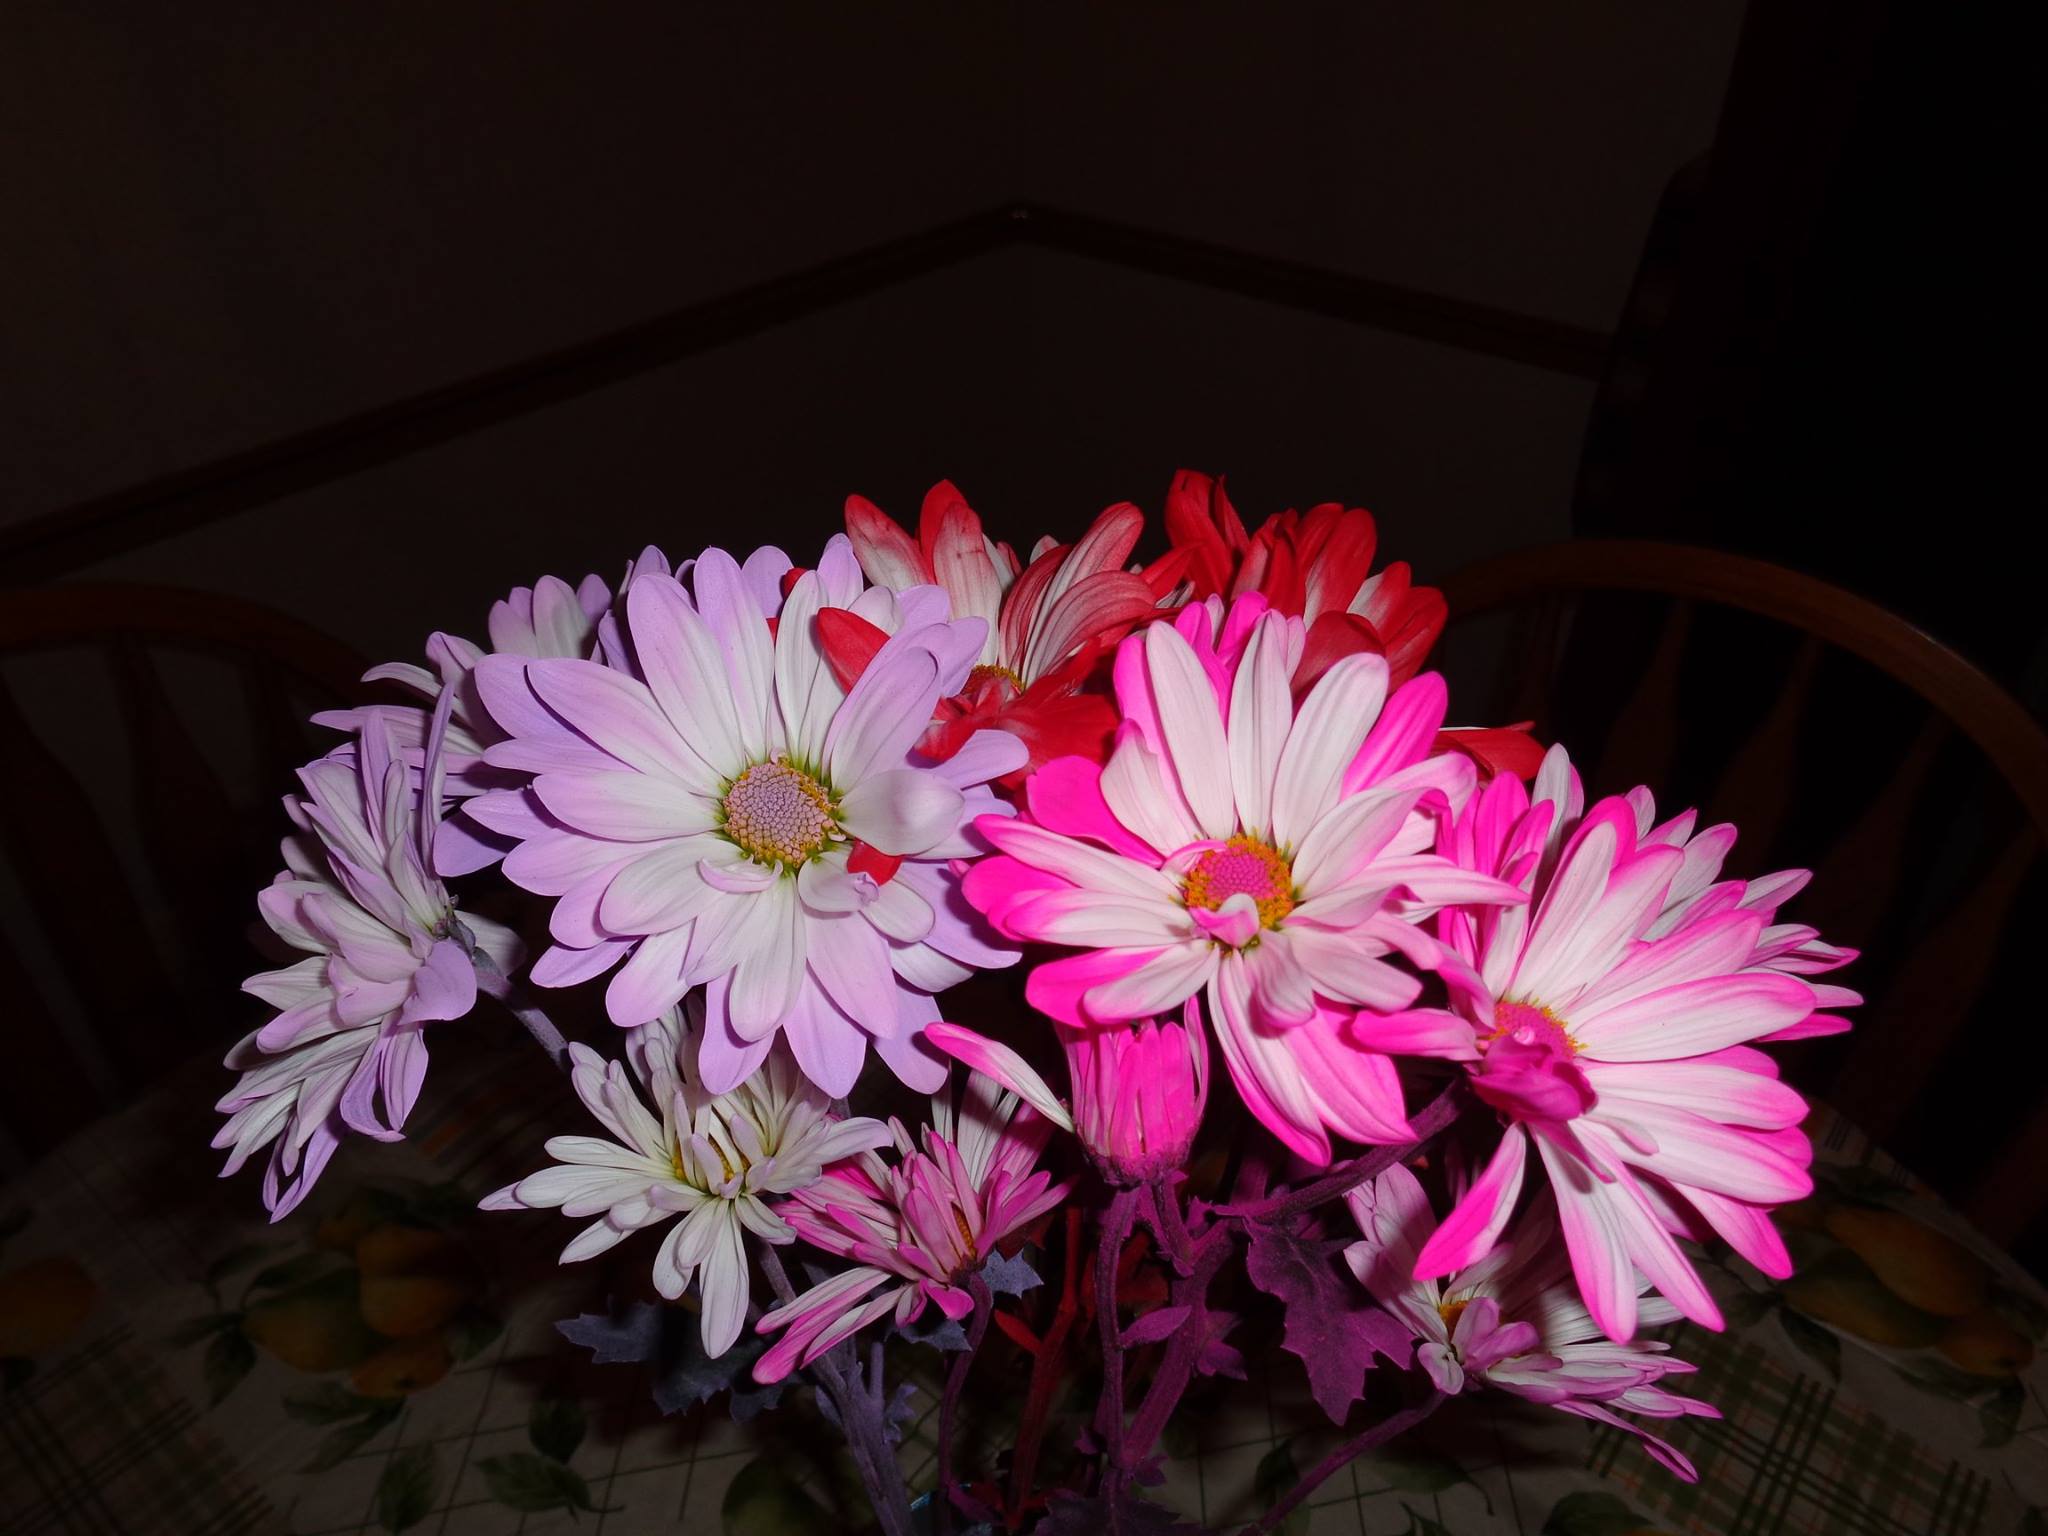 Free photo: Colorful Daisies - Colorful, Daisies, Daisy - Free Download ...